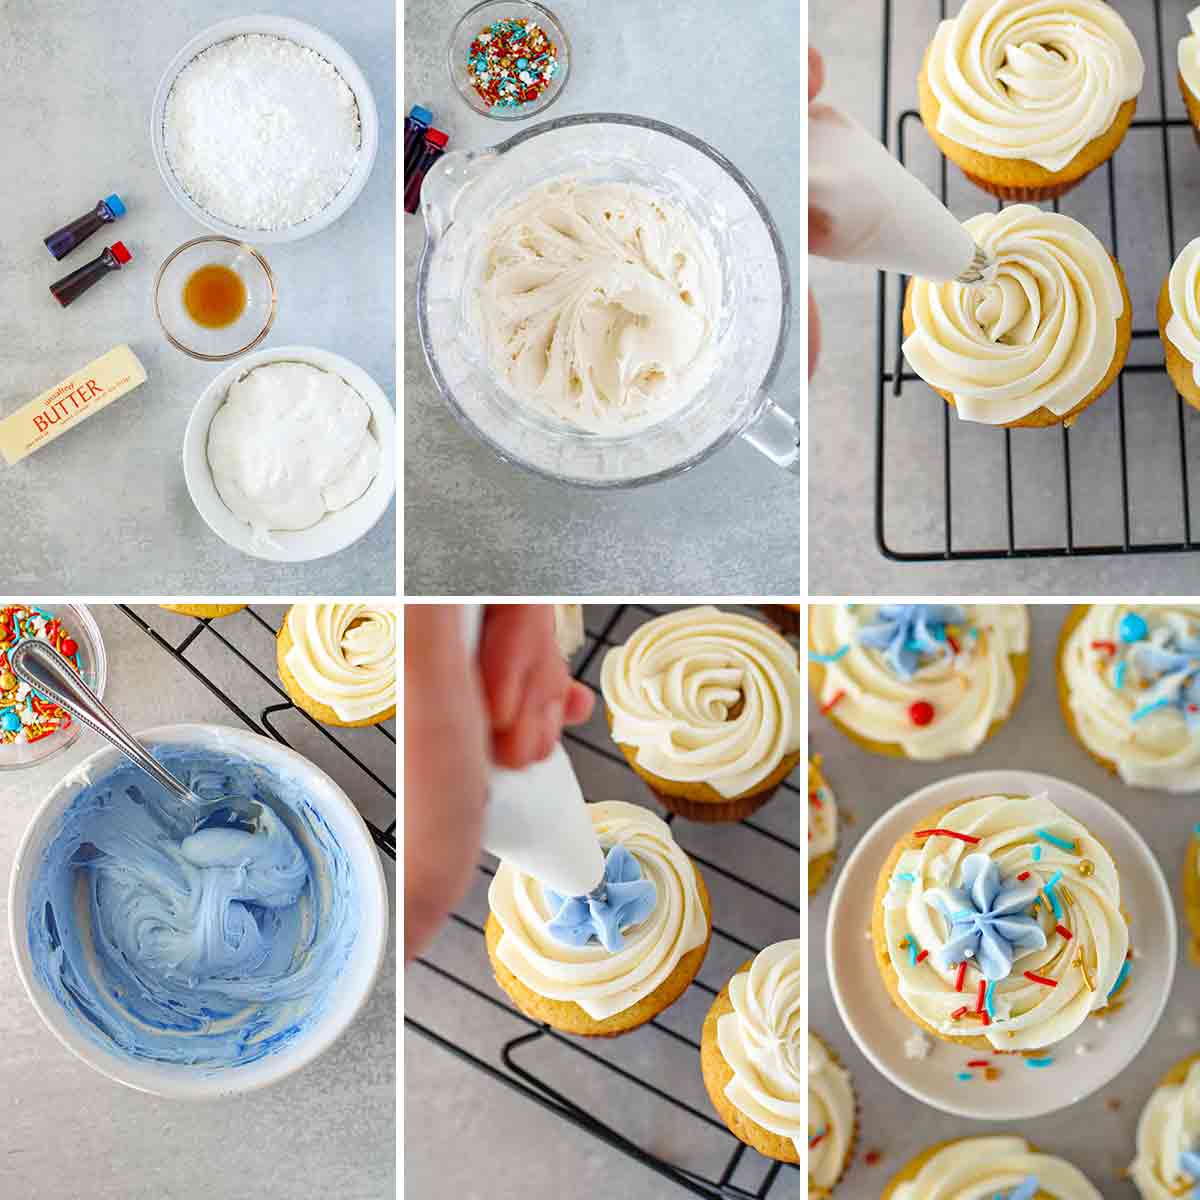 How to Make Marshmallow Frosting